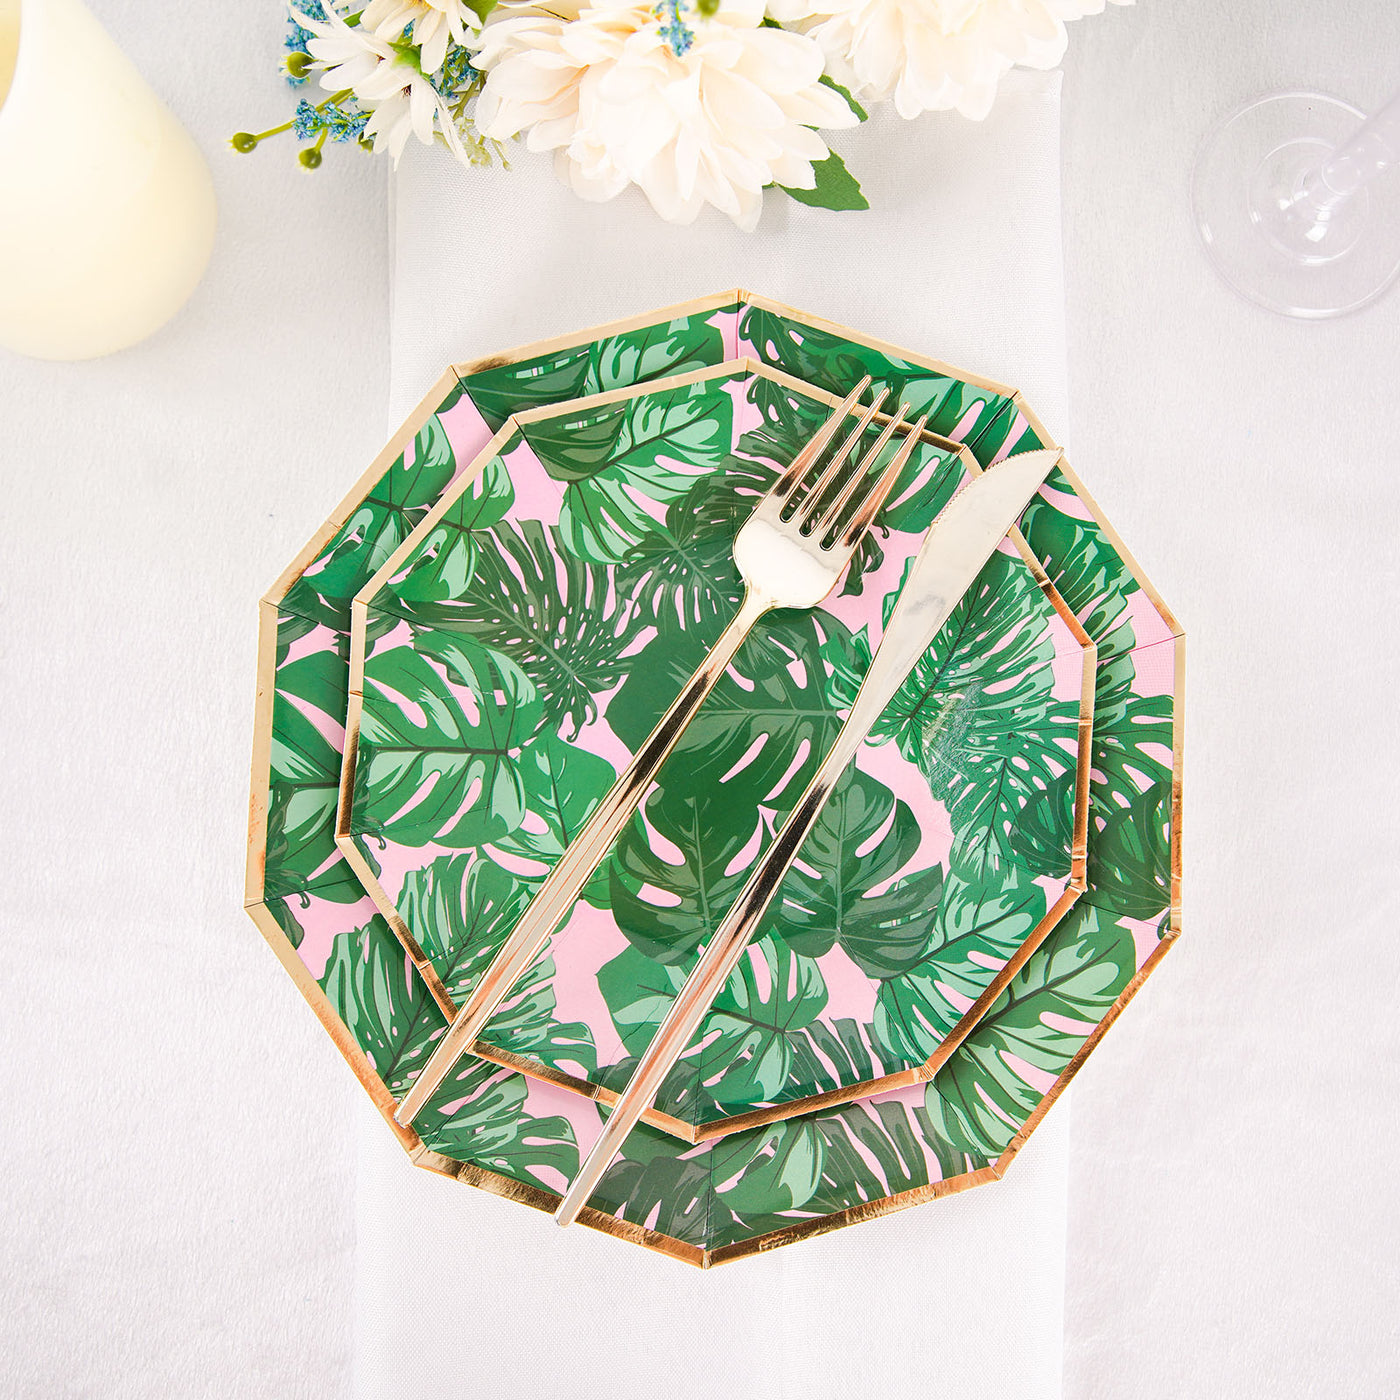 Decagon Dinner Paper Plates, Disposable Party Plates